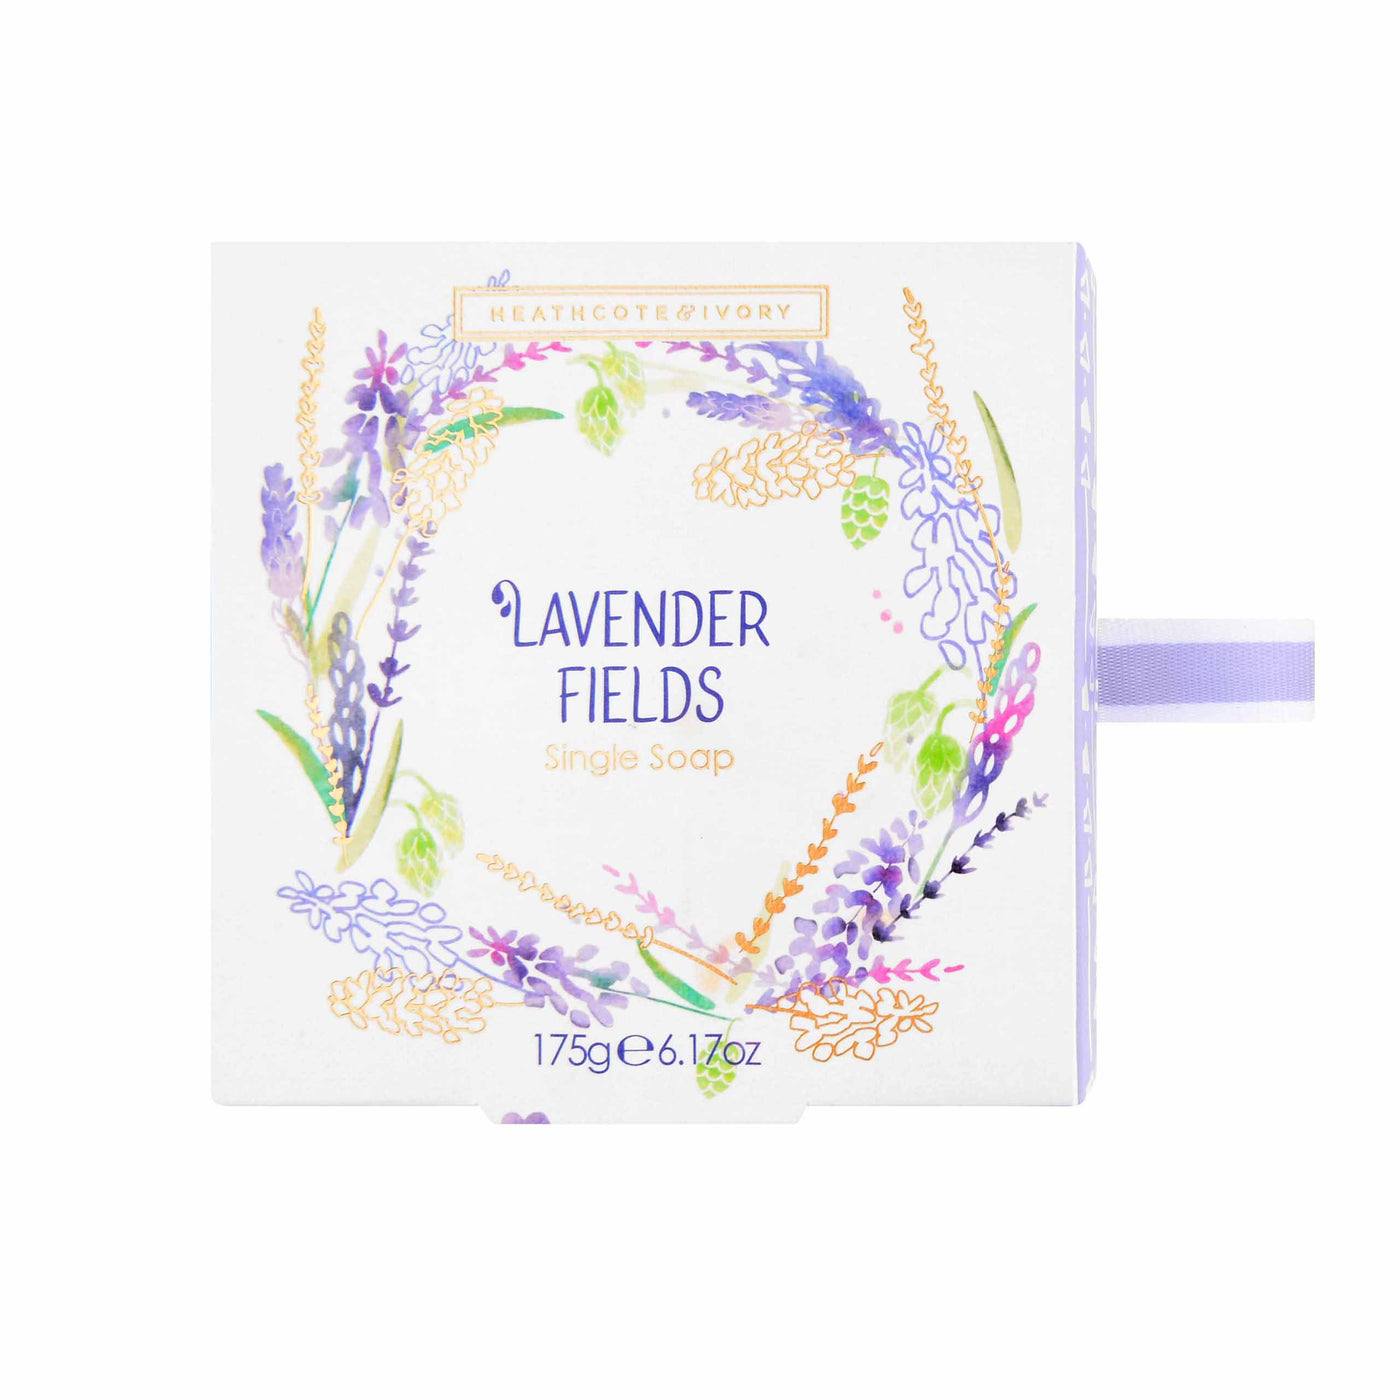 Lavender Fields Scented Soap - Heathcote & Ivory